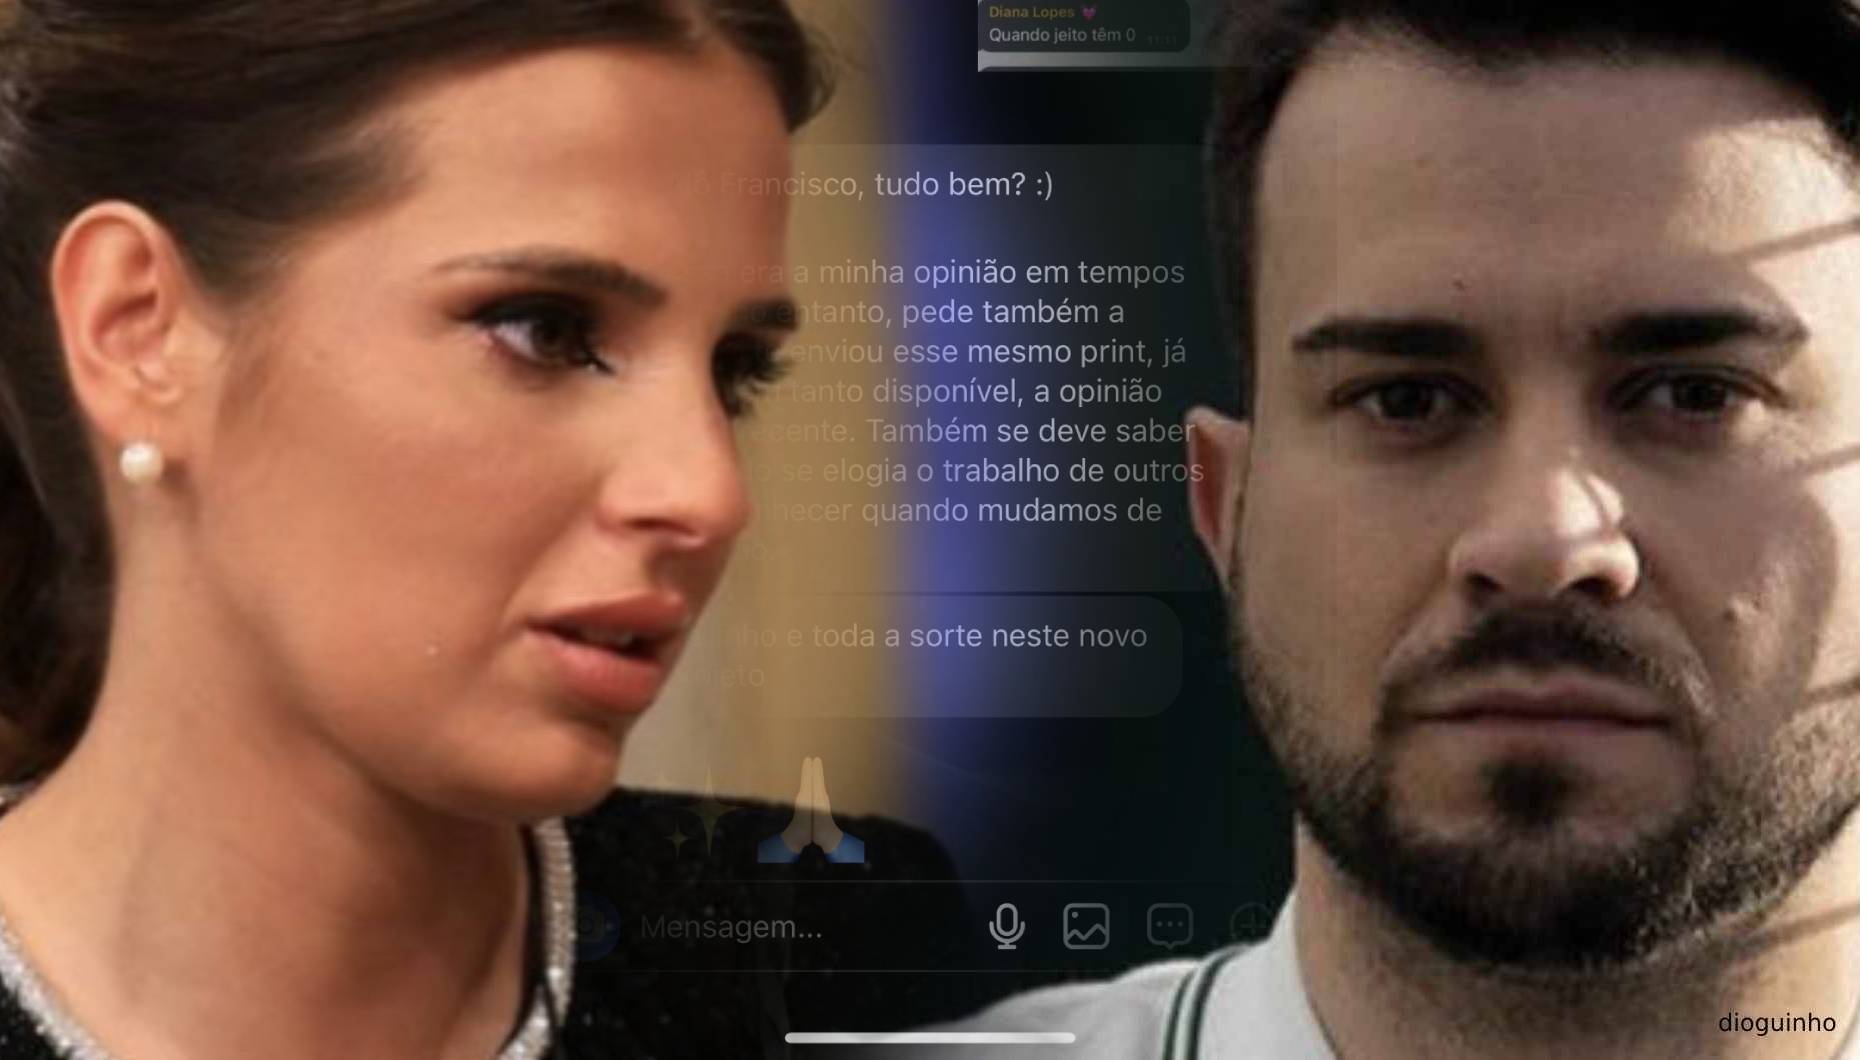 Francisco Montero exposes a private message from Diana Lopez with a “outburst”